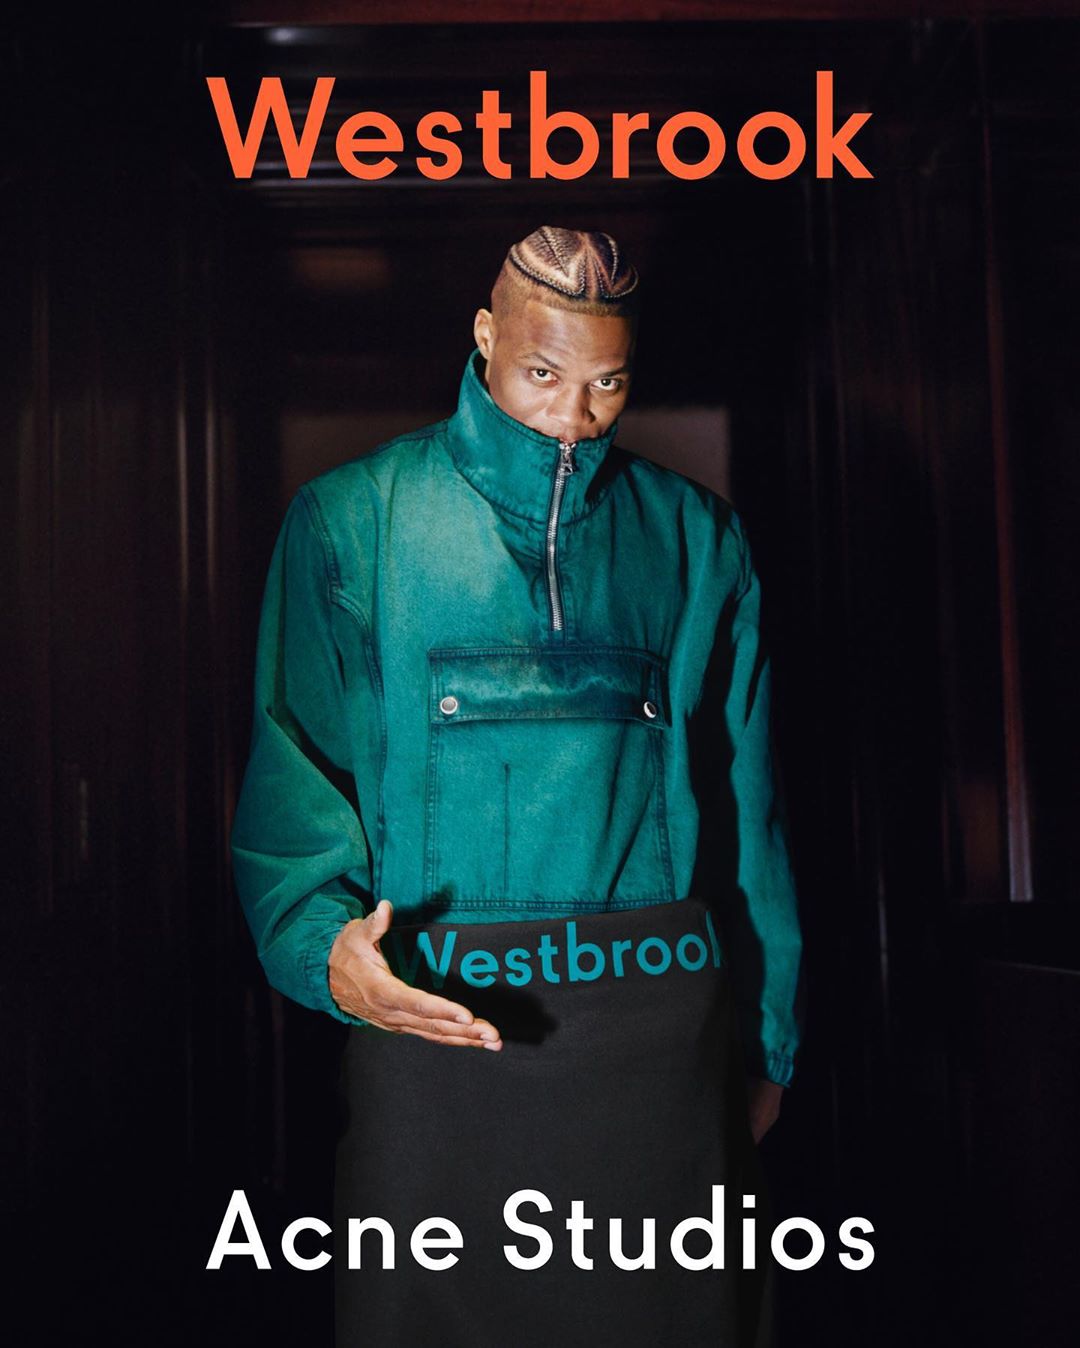 ACNE STUDIOS LAUNCH THE RUSSELL WESTBROOK CAPSULE COLLECTION